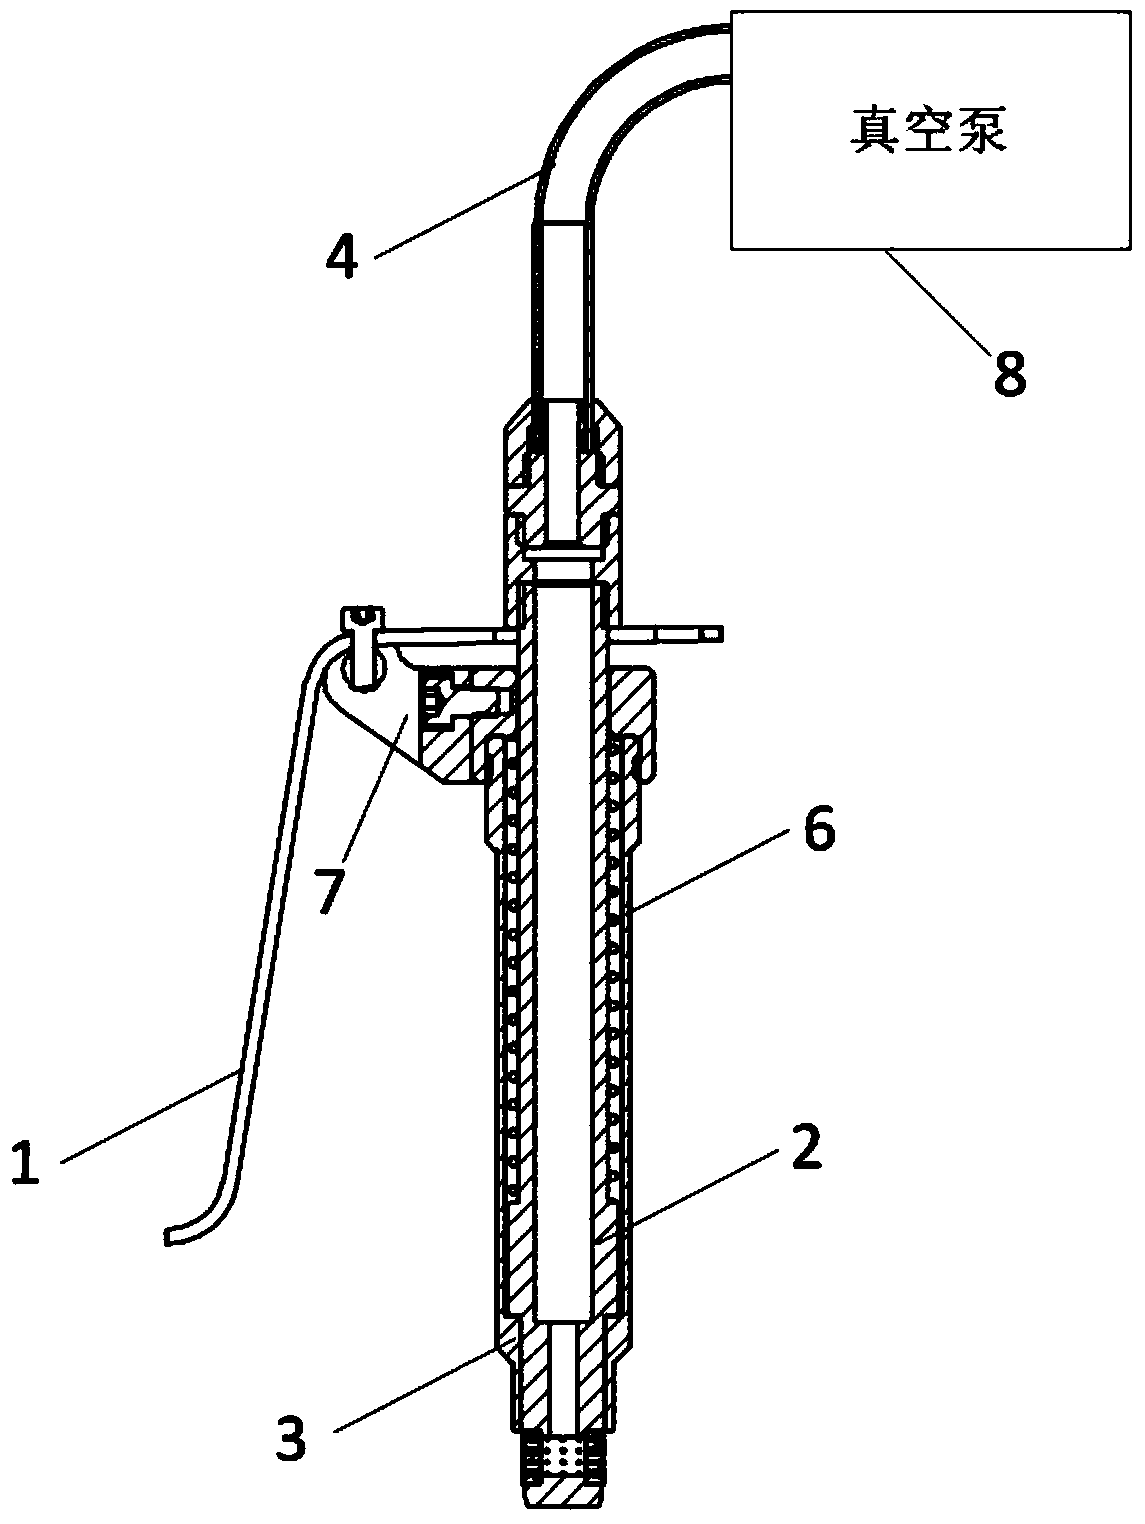 Linear bearing assembly device